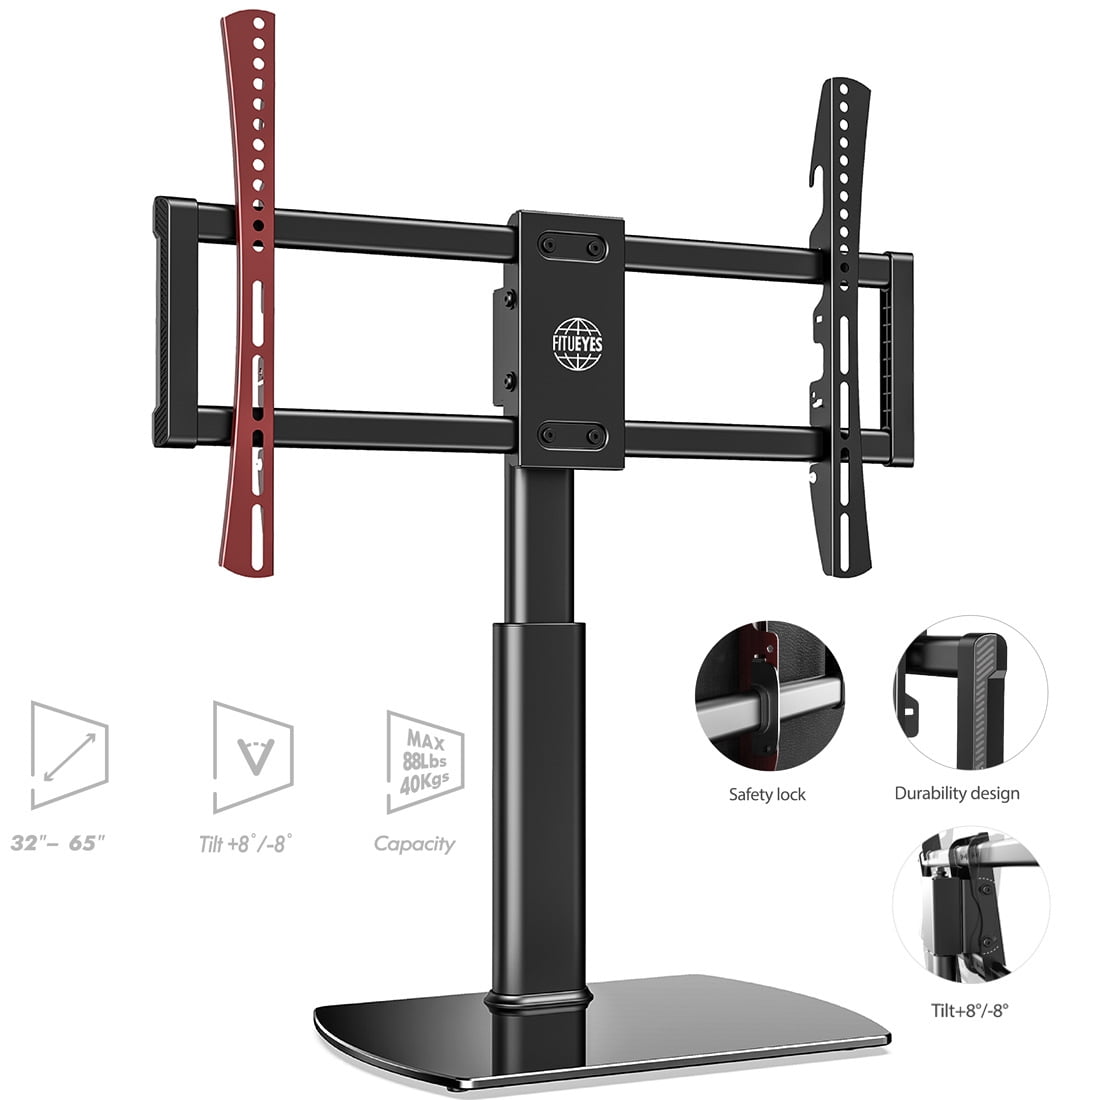 Max VESA 600x400mm Height Adjustable TV Stand with Wire Management ELIVED Universal Swivel Tilt TV Stand for Most 37-70 inch Flat Curved LCD LED TVs YD6003. Table Top TV Base Holds Up to 88lbs 